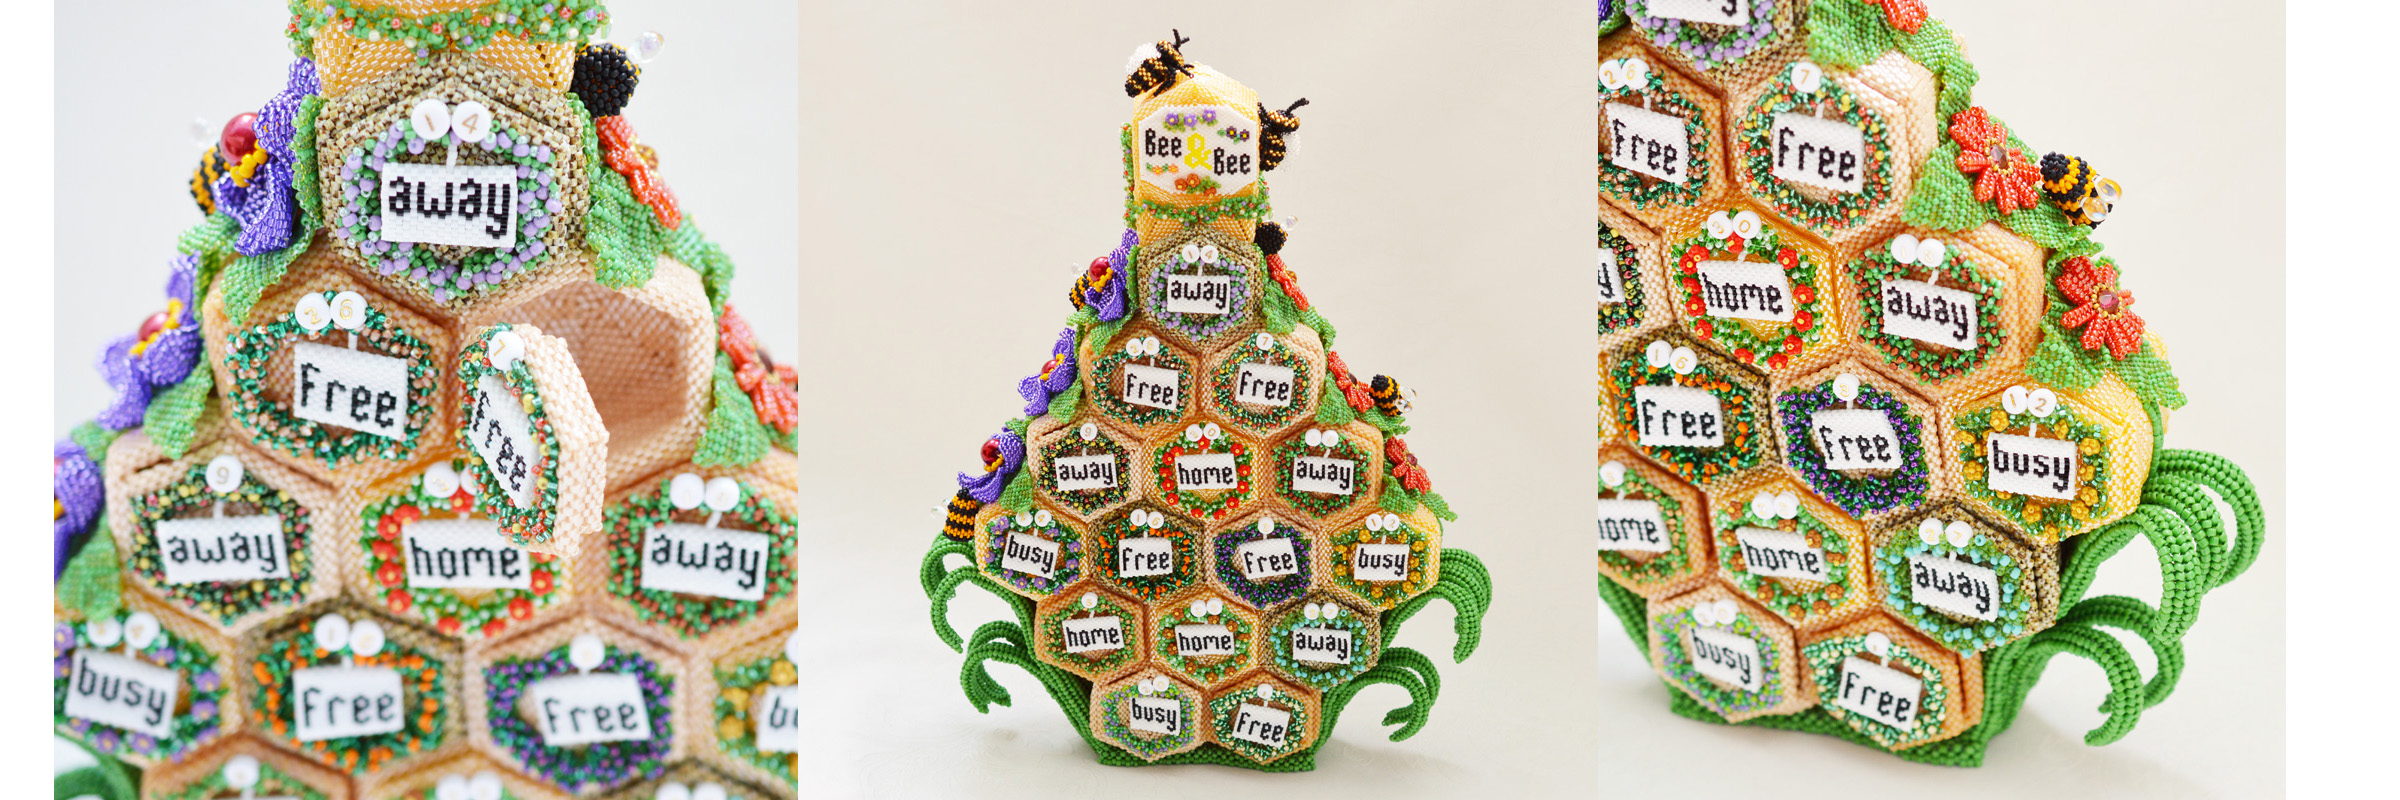 The Beaded Bee Hotel Online Class with Katie Dean